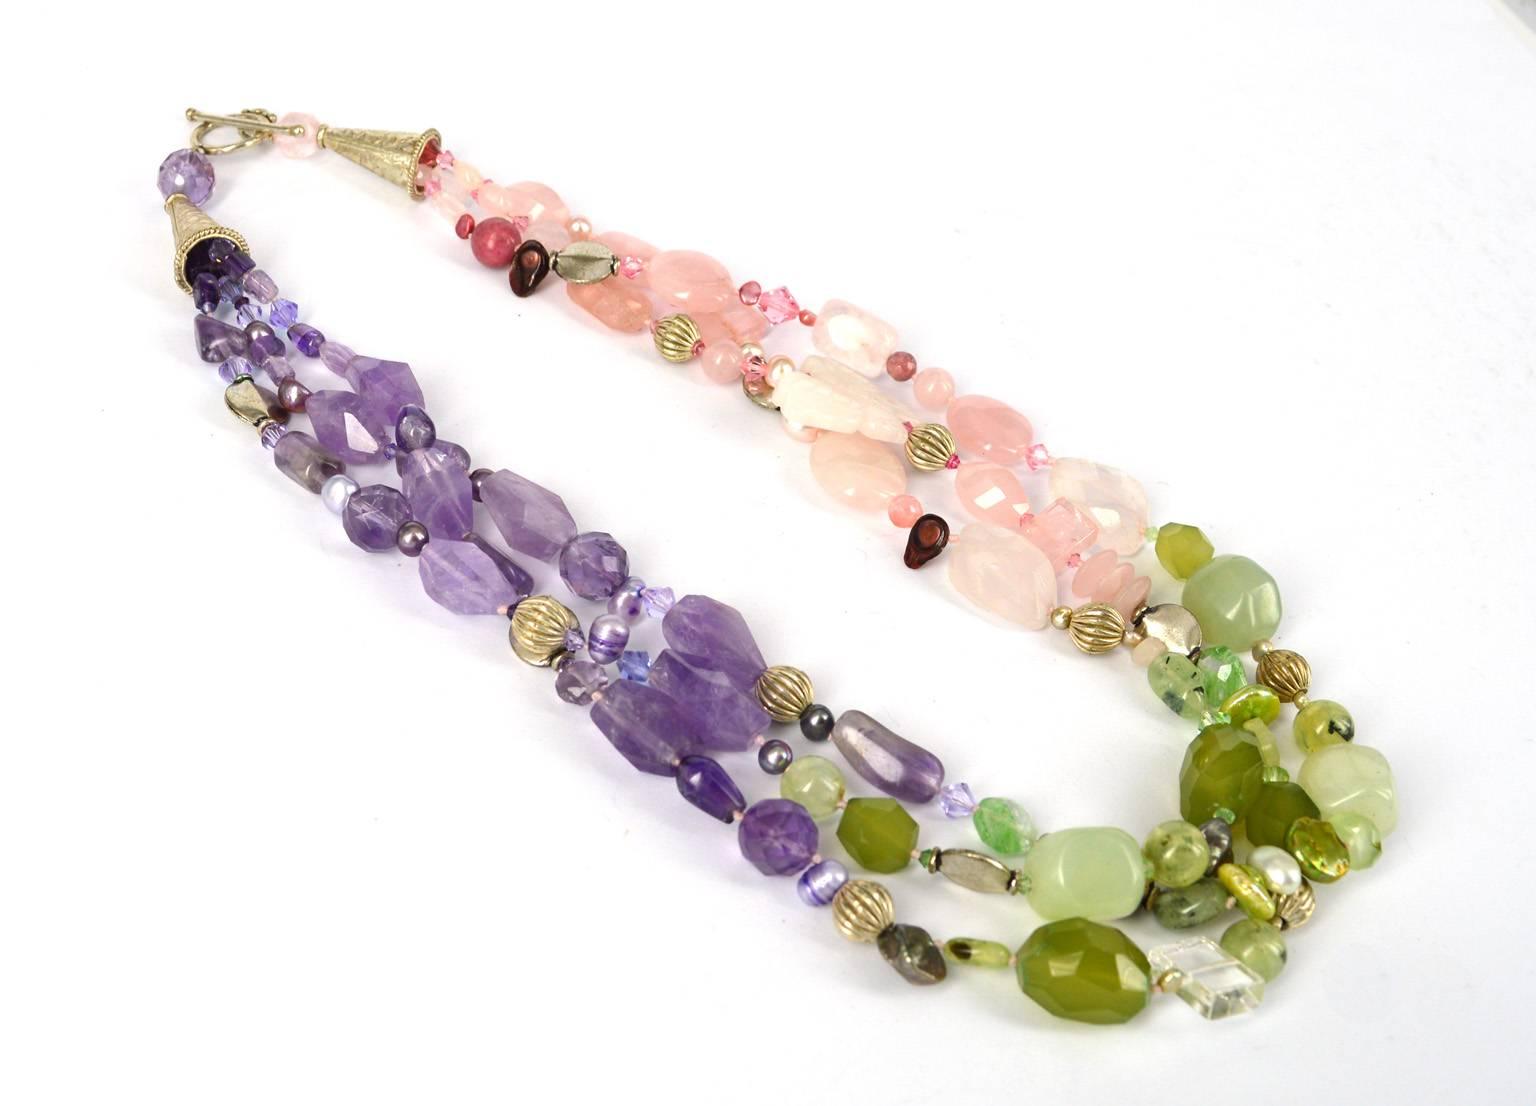 3 Strand torsade Necklace made up of various shapes and stones. Rose quartz swarovski freshwater pearls prehnite chalcedony amethyst and silver plated copper.
56cm in length